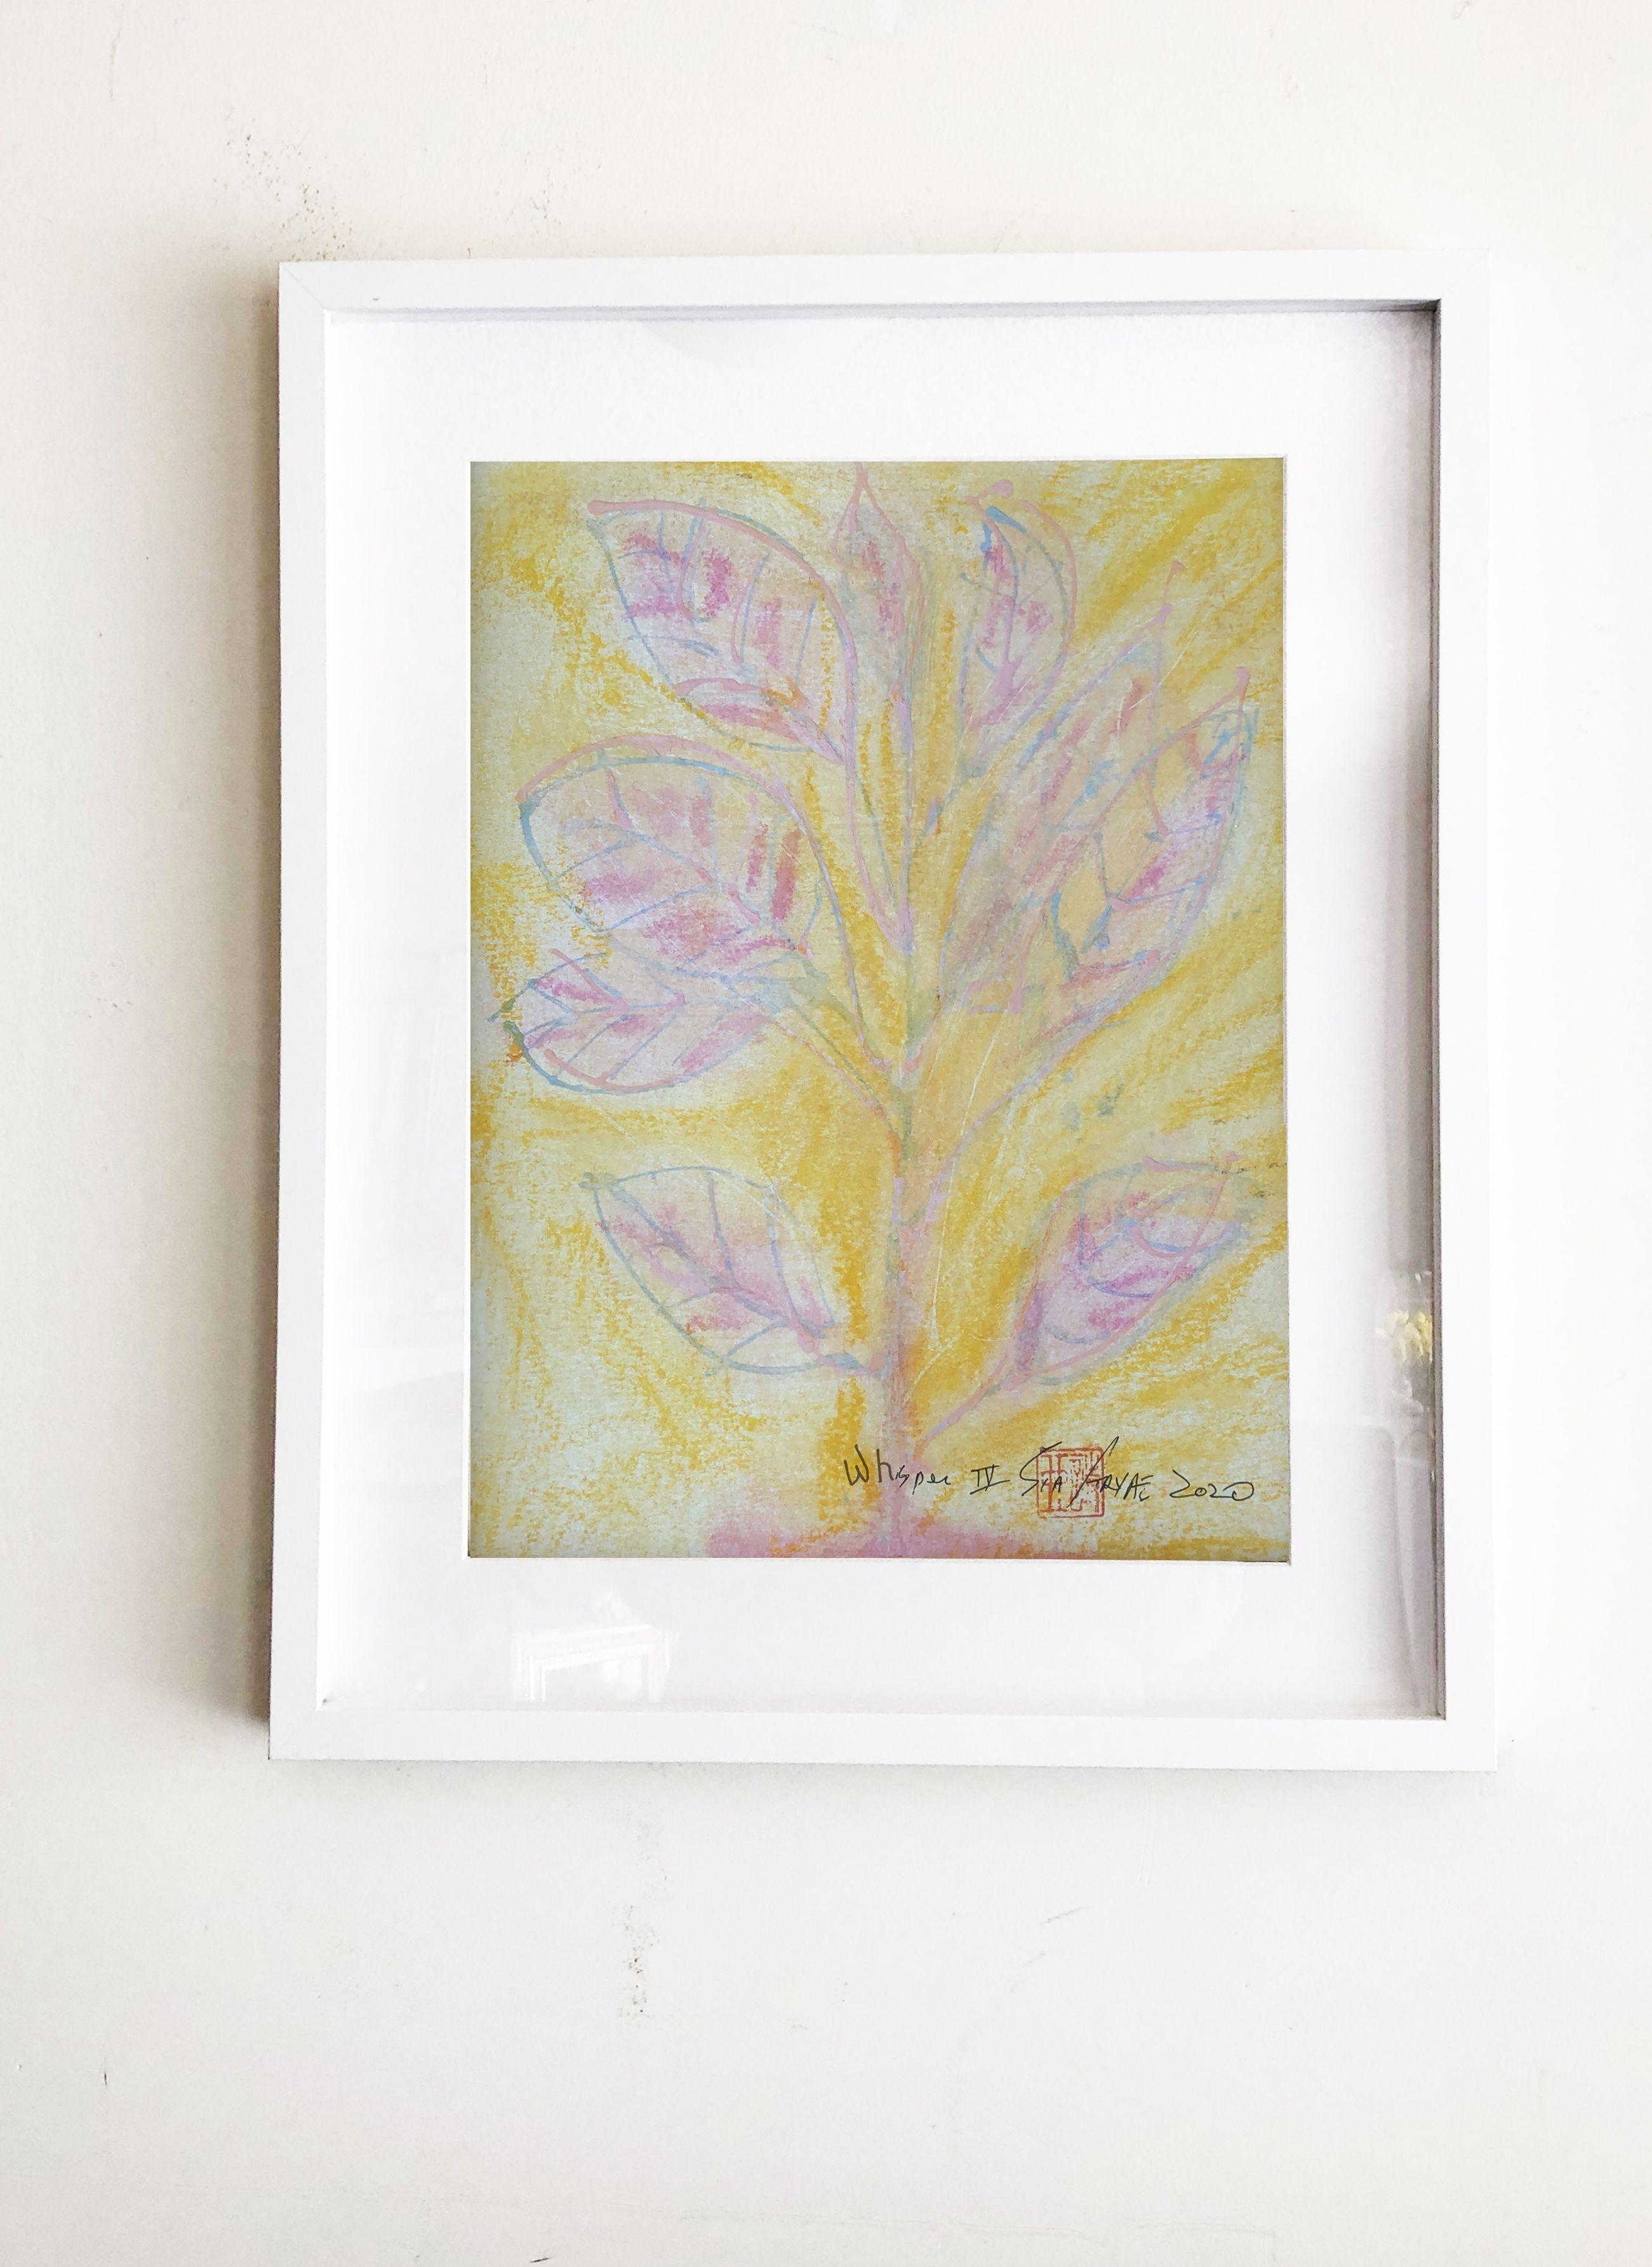 This lively original botanical abstract painting with   color of sunshine on hand cut heavy   stock brings a uplifting energy to any room.   See the others in the series, too, to create a dramatic grouping.   Painting is 8.5X10.5